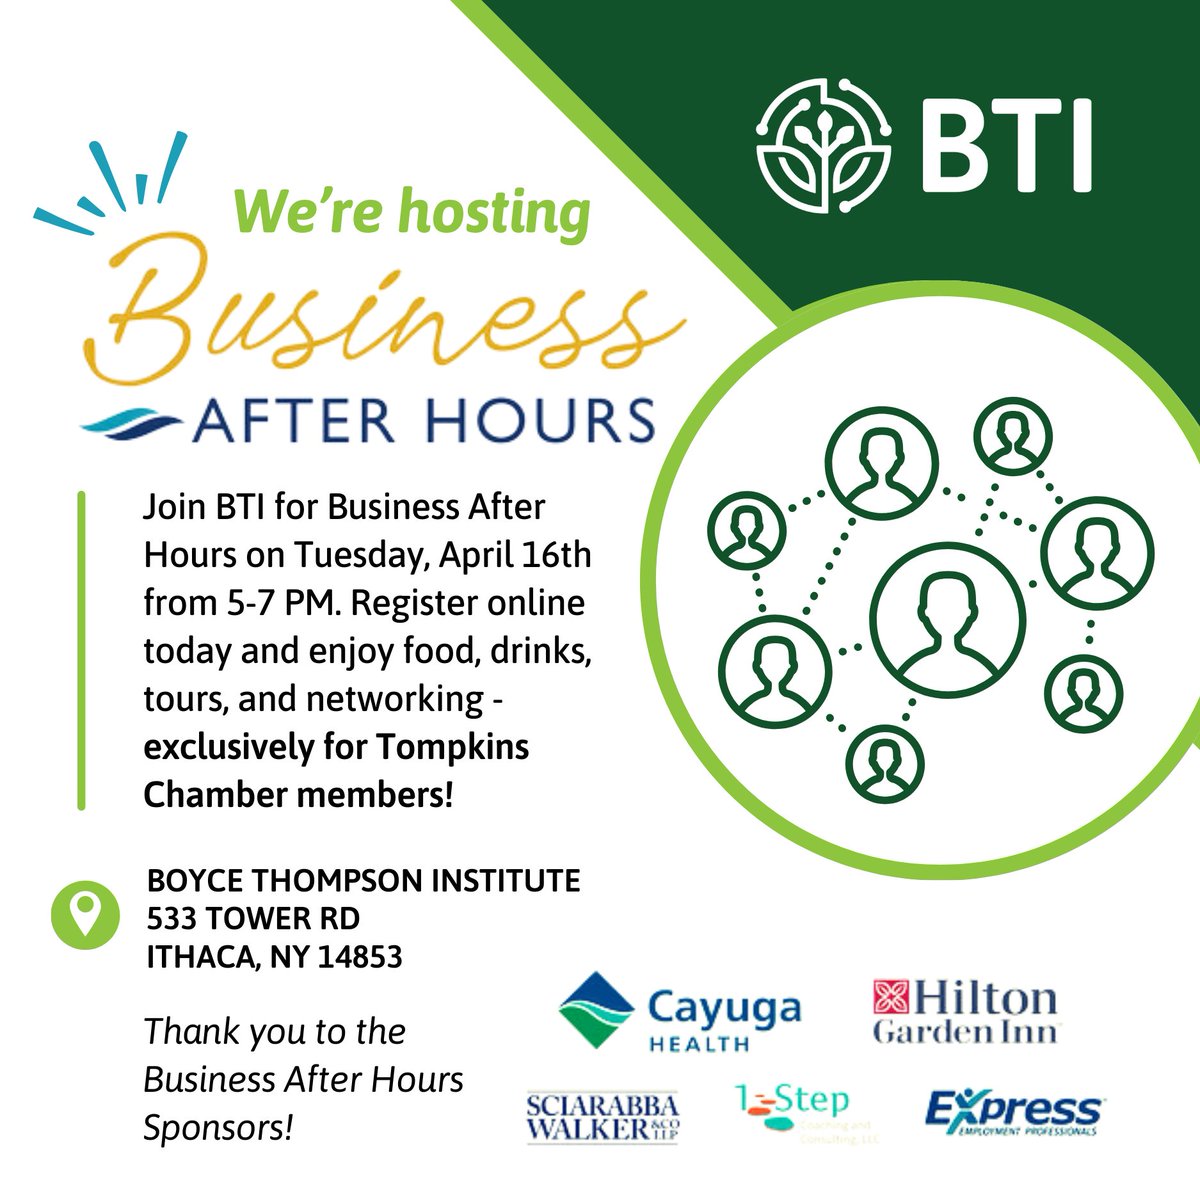 Tompkins Chamber Members: You're Invited to Discover, Celebrate, and Connect with us! As we enter our remarkable 100th year at BTI, we're thrilled to extend an exclusive invitation to our valued @TompkinsChamber members. business.tompkinschamber.org/events/details…